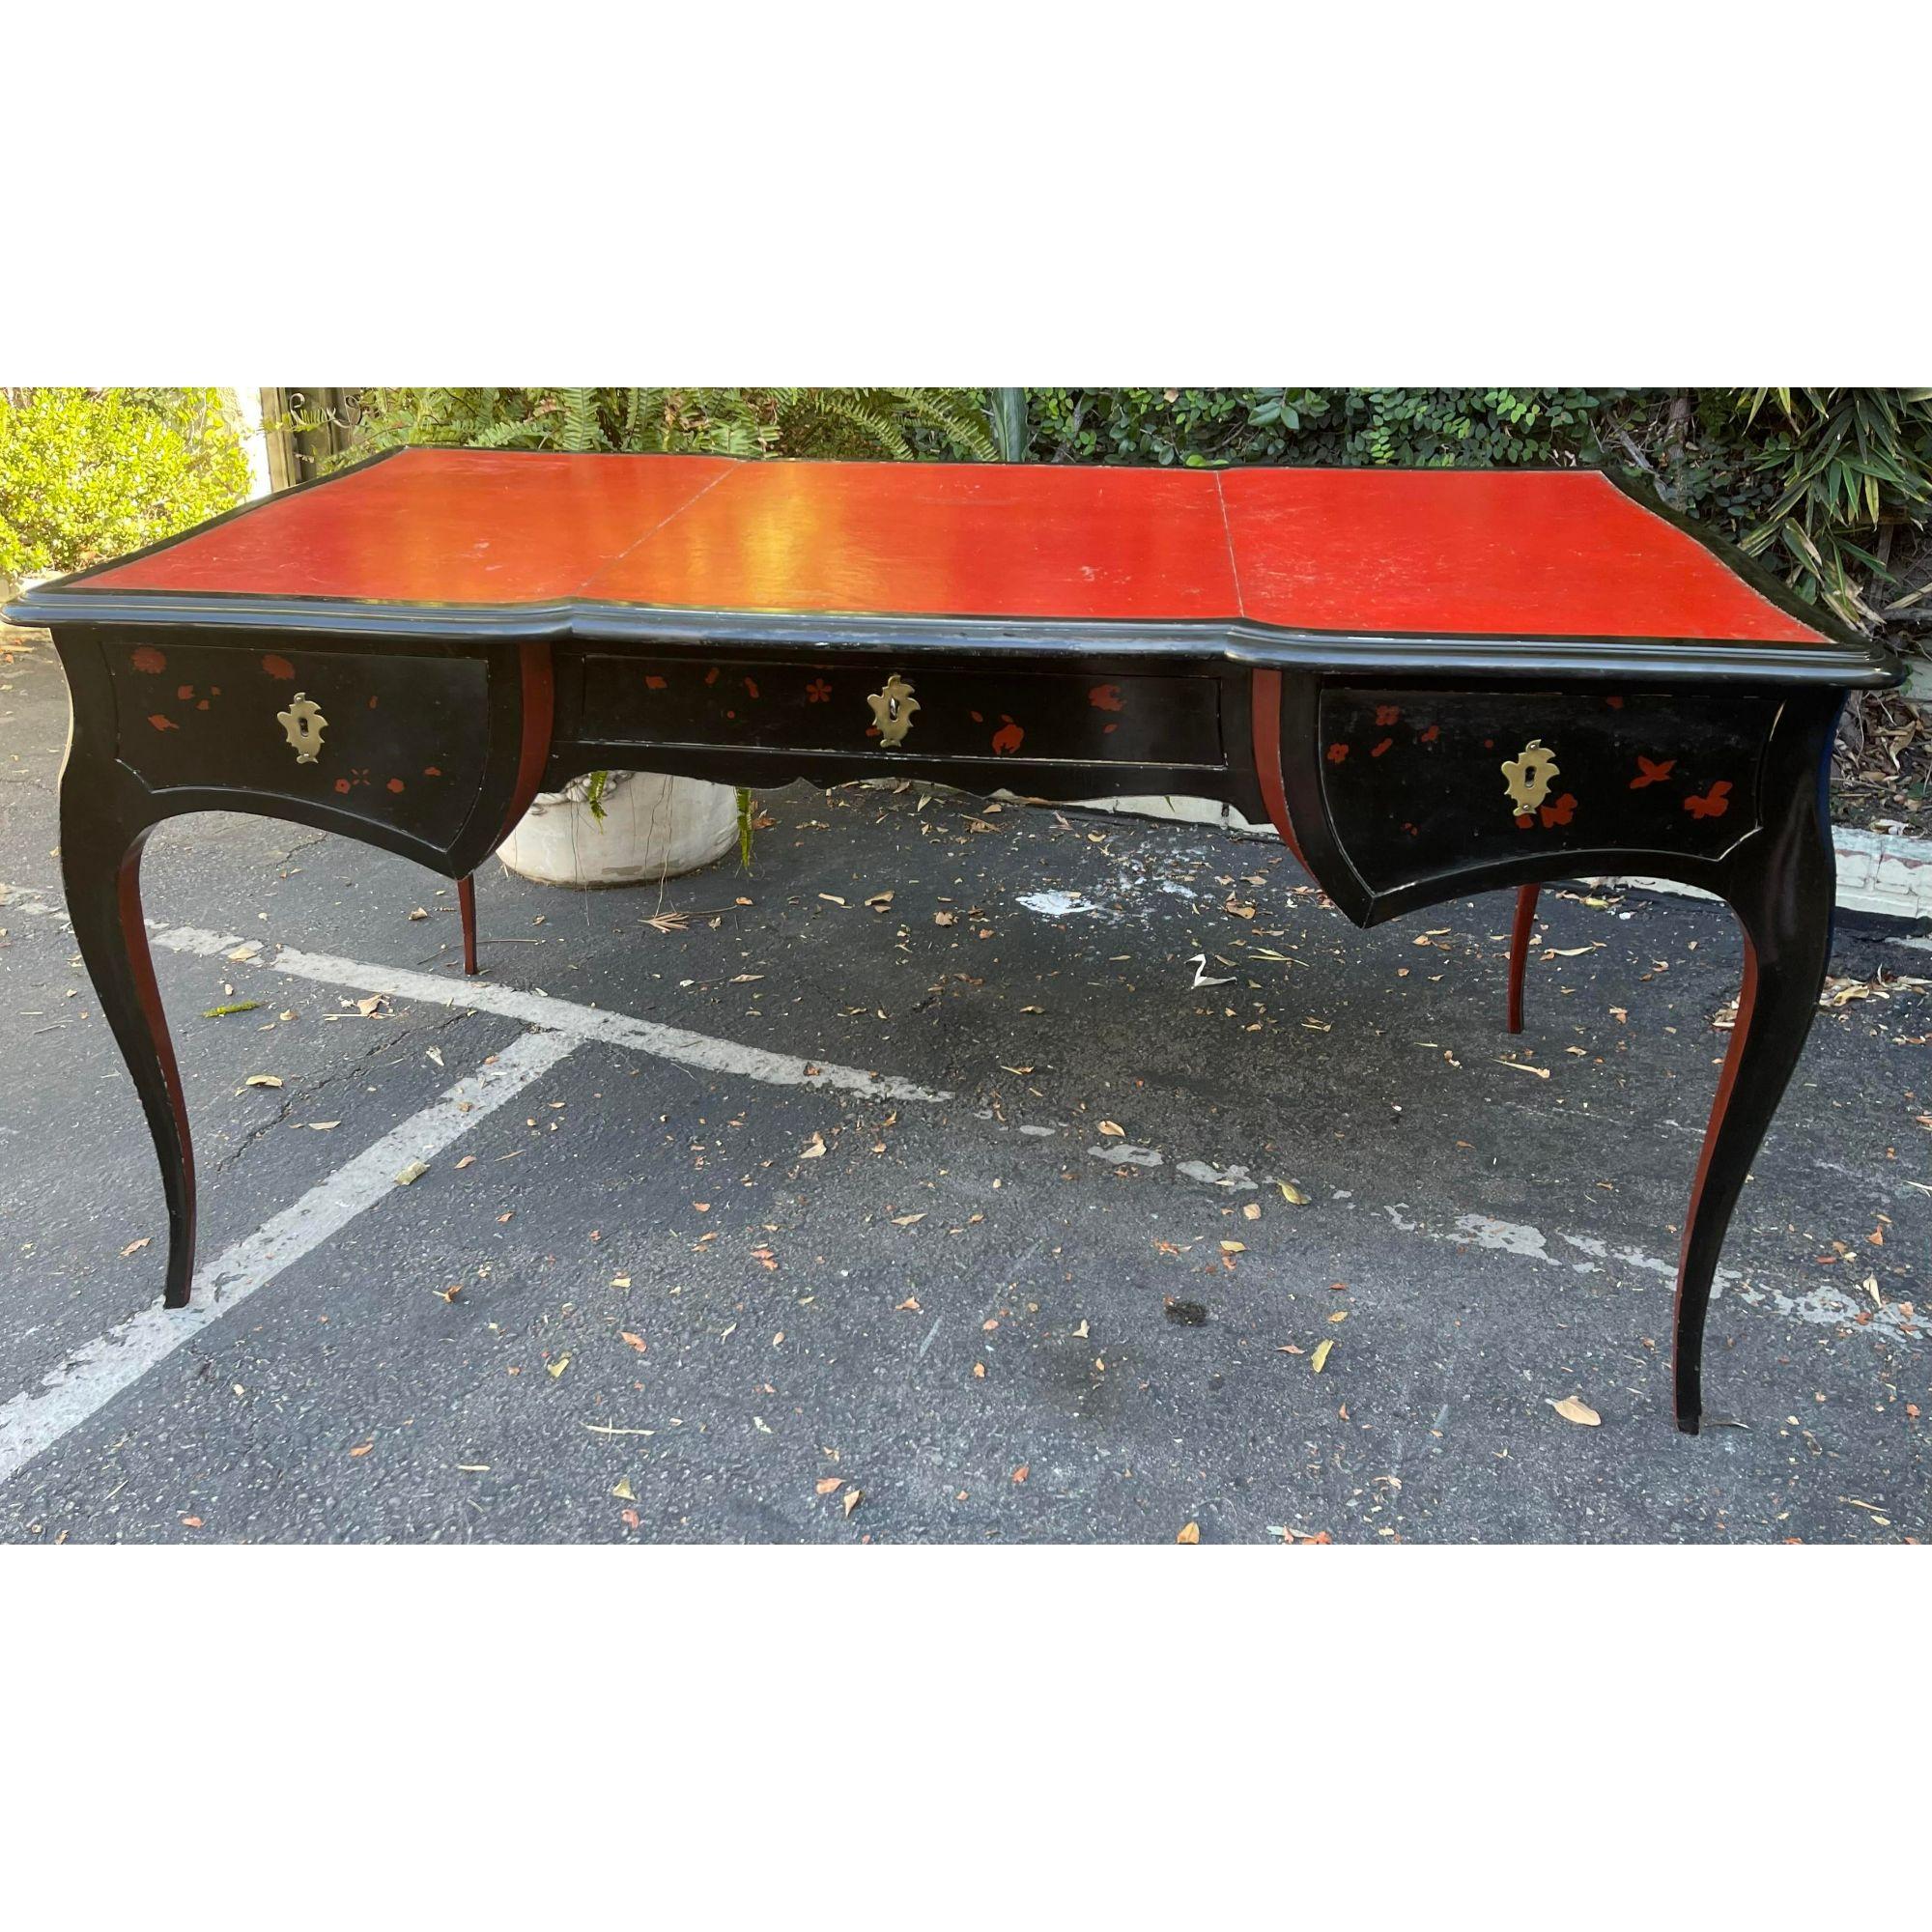 Antique Chinoiserie Black Lacquer Red Leather Bureau Plat Writing Table Desk For Sale 1